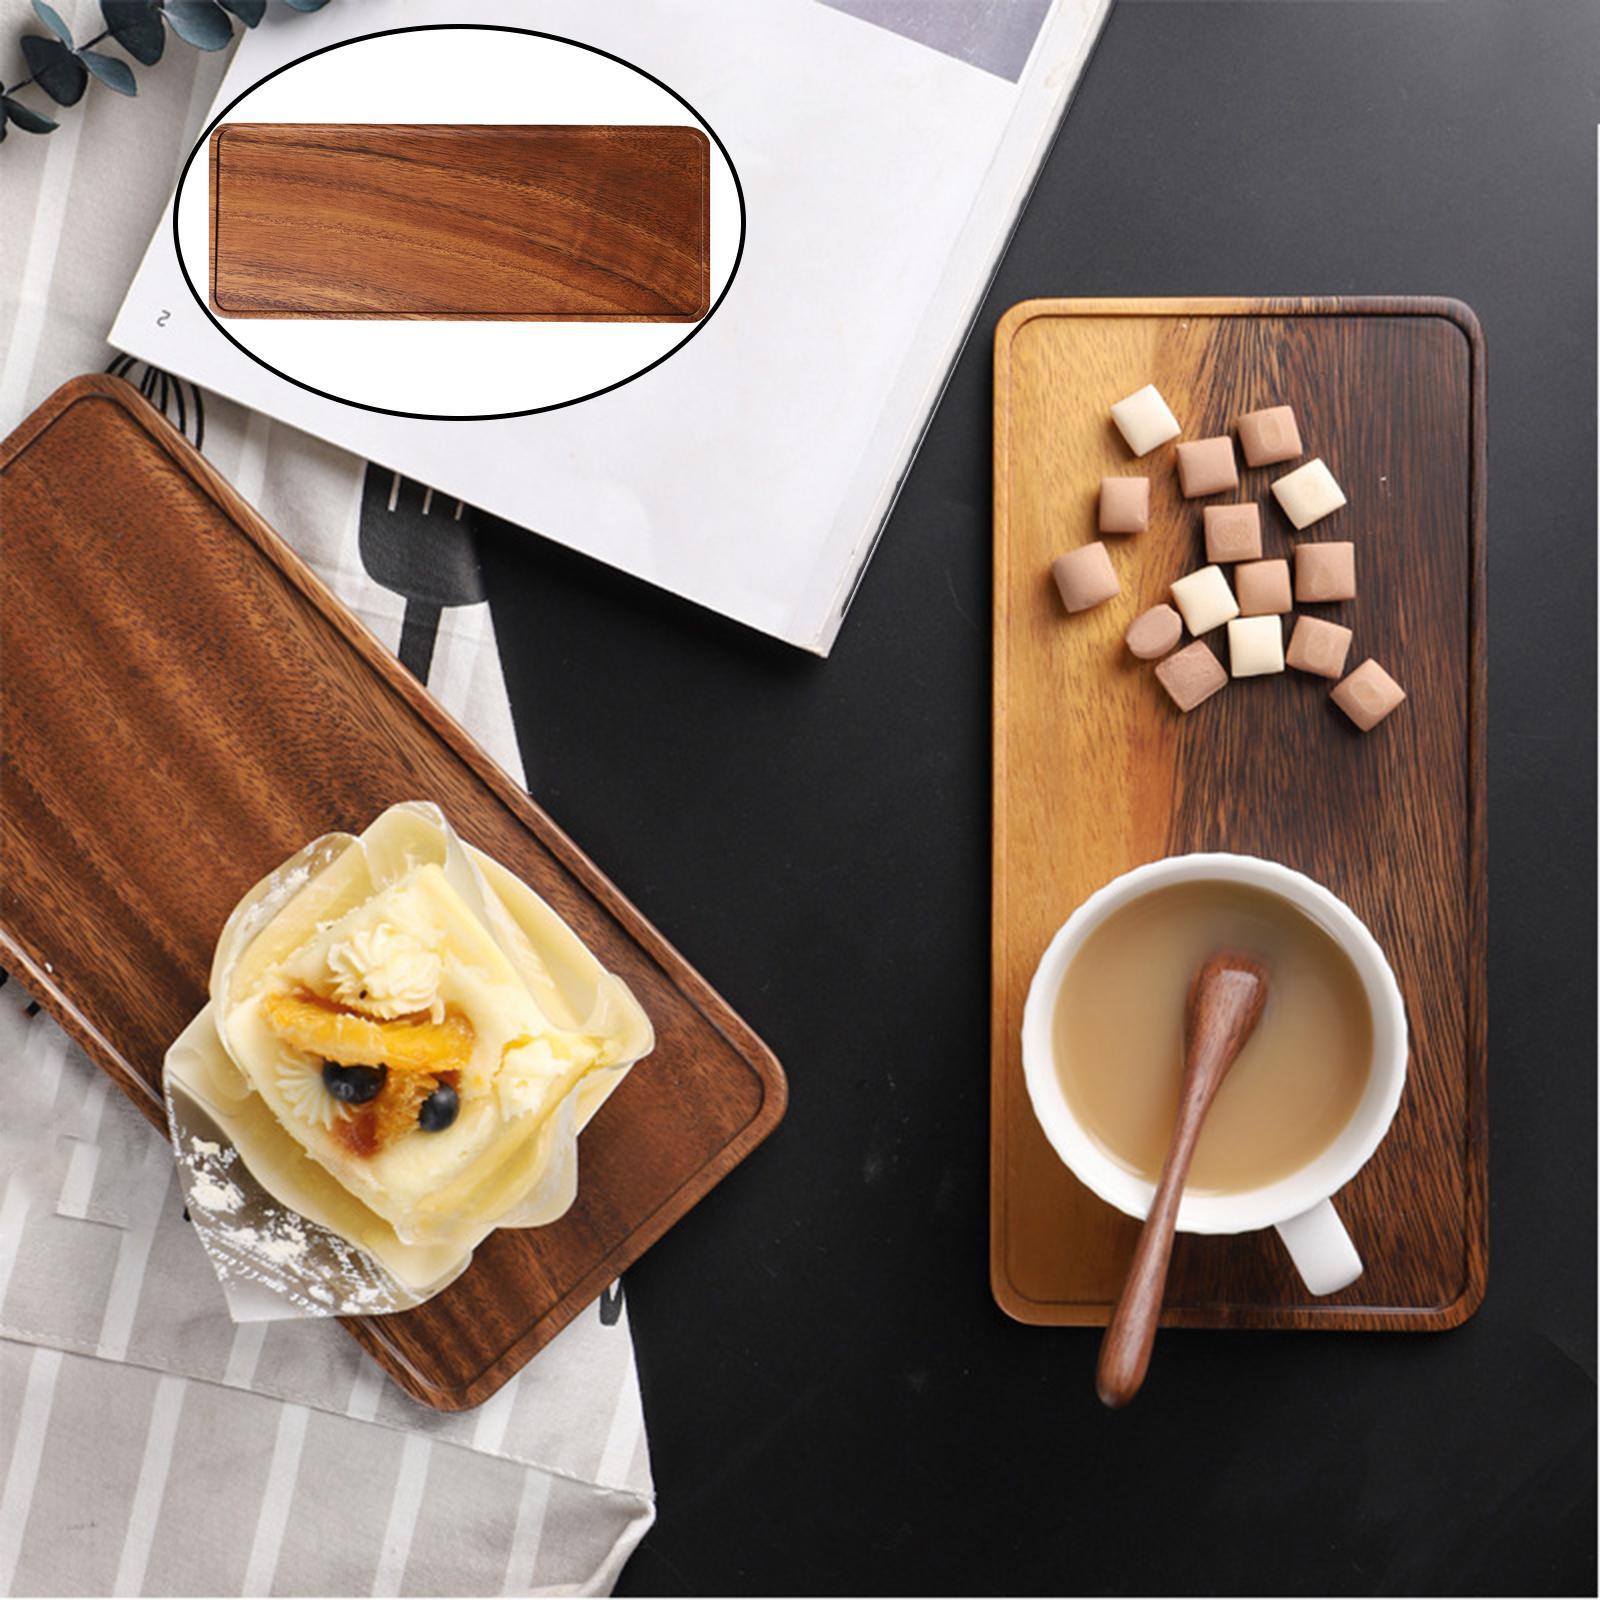 Wood Rectangular Tableware Serving Tray Food Fruit Plate Tea Serving Plate Snacks Food Storage Dish Serving Table Plate for Restaurant Home